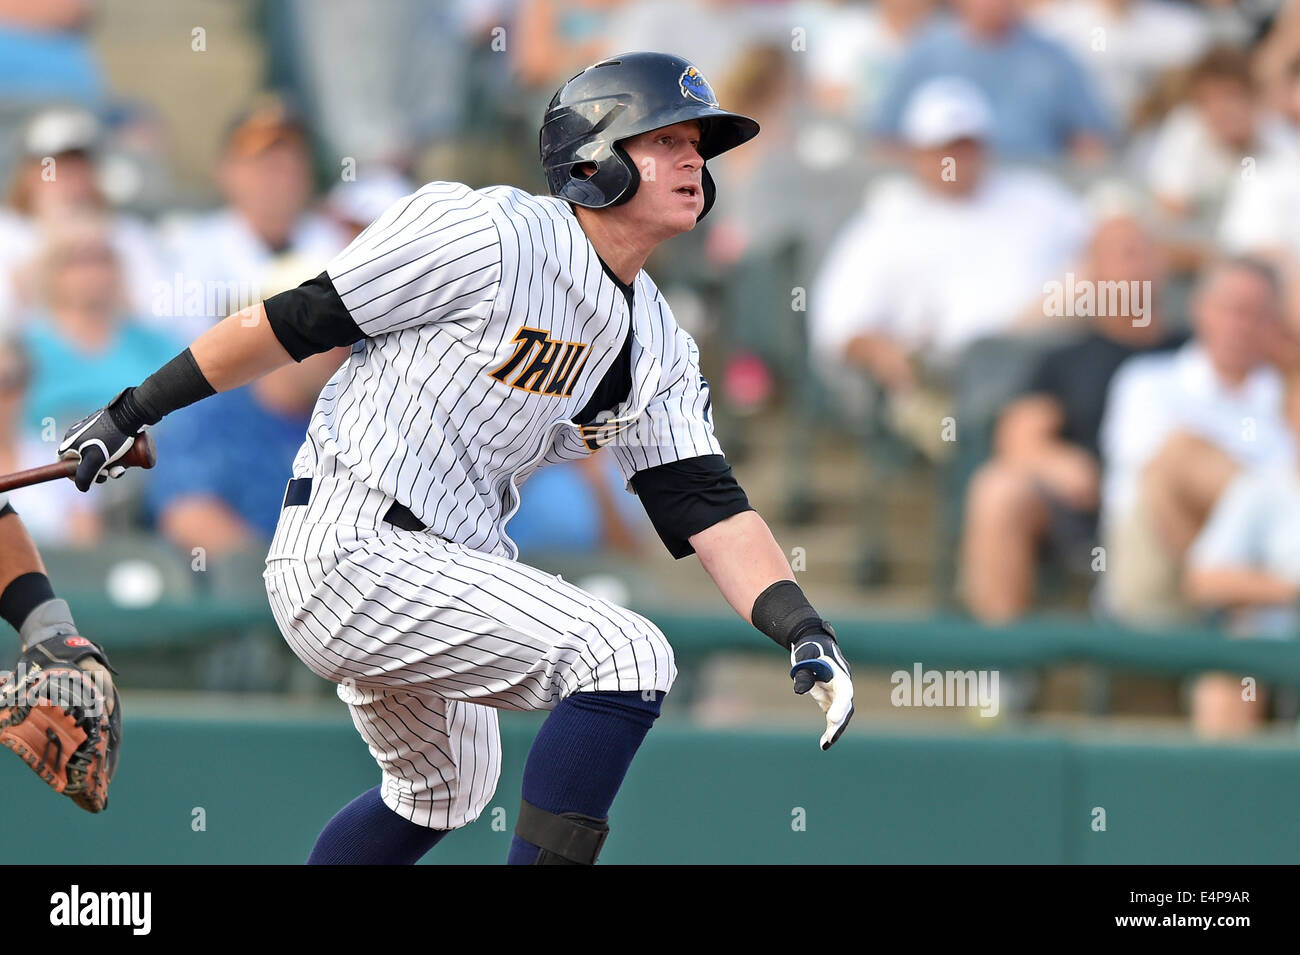 Trenton, New Jersey, USA. 12th July, 2014. Trenton Thunder outfielder BEN GAMEL (8) in an Eastern League game at Arm & Hammer Park in Trenton, NJ. © Ken Inness/ZUMA Wire/Alamy Live News Stock Photo